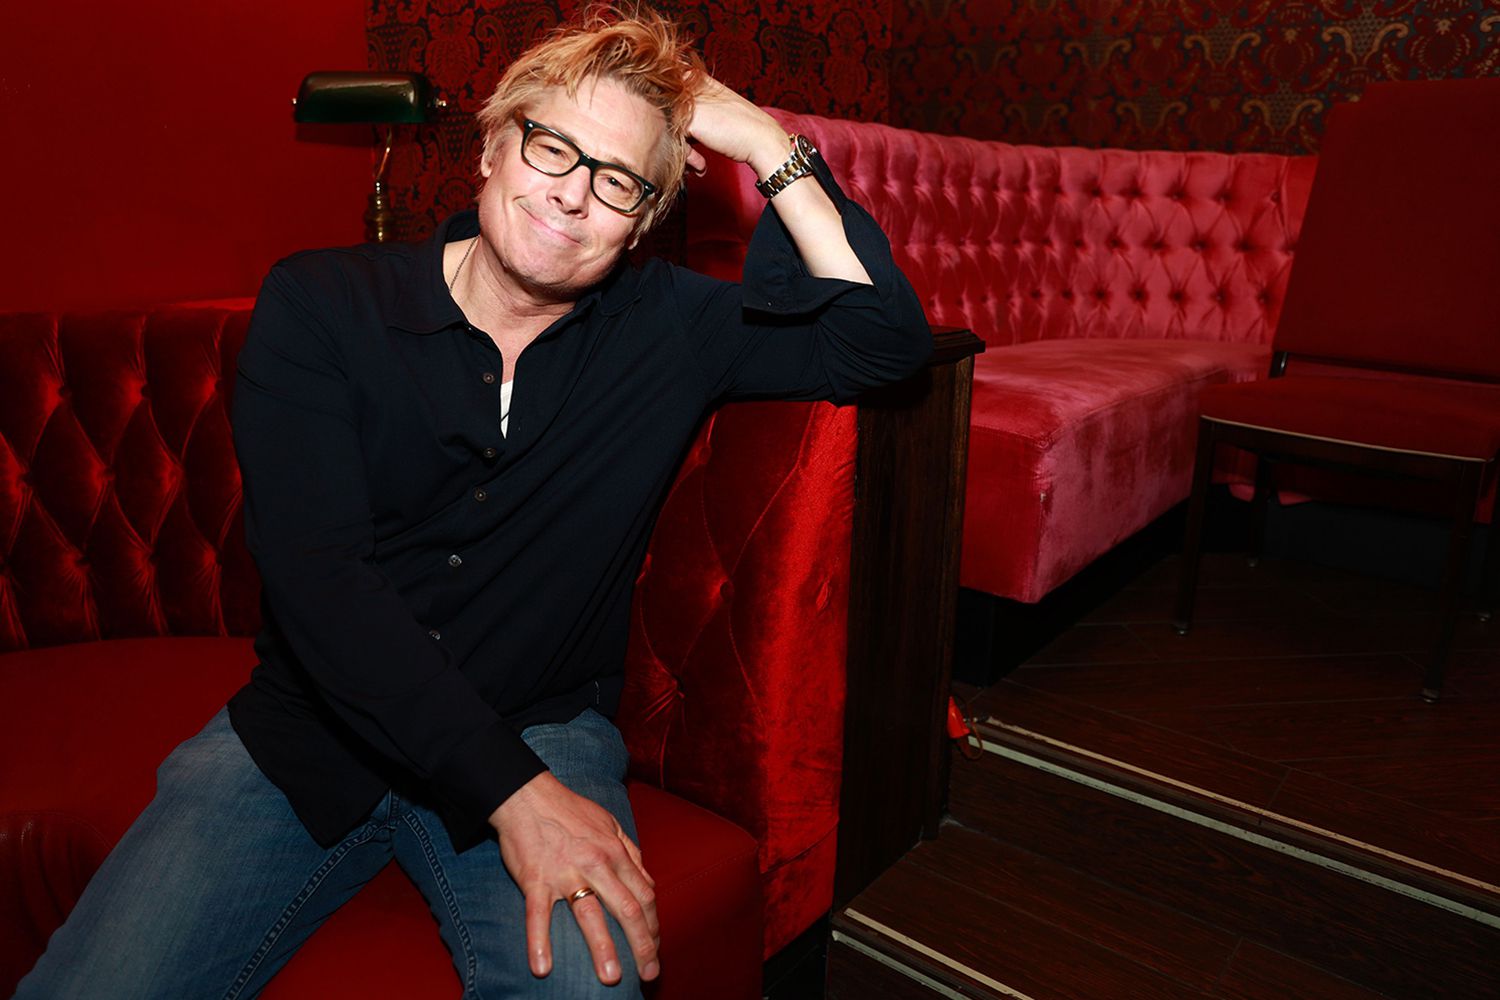 Kato Kaelin attends the Roosevelt Comedy Live Drive-In Show at The Hollywood Roosevelt on April 09, 2021 in Los Angeles, California